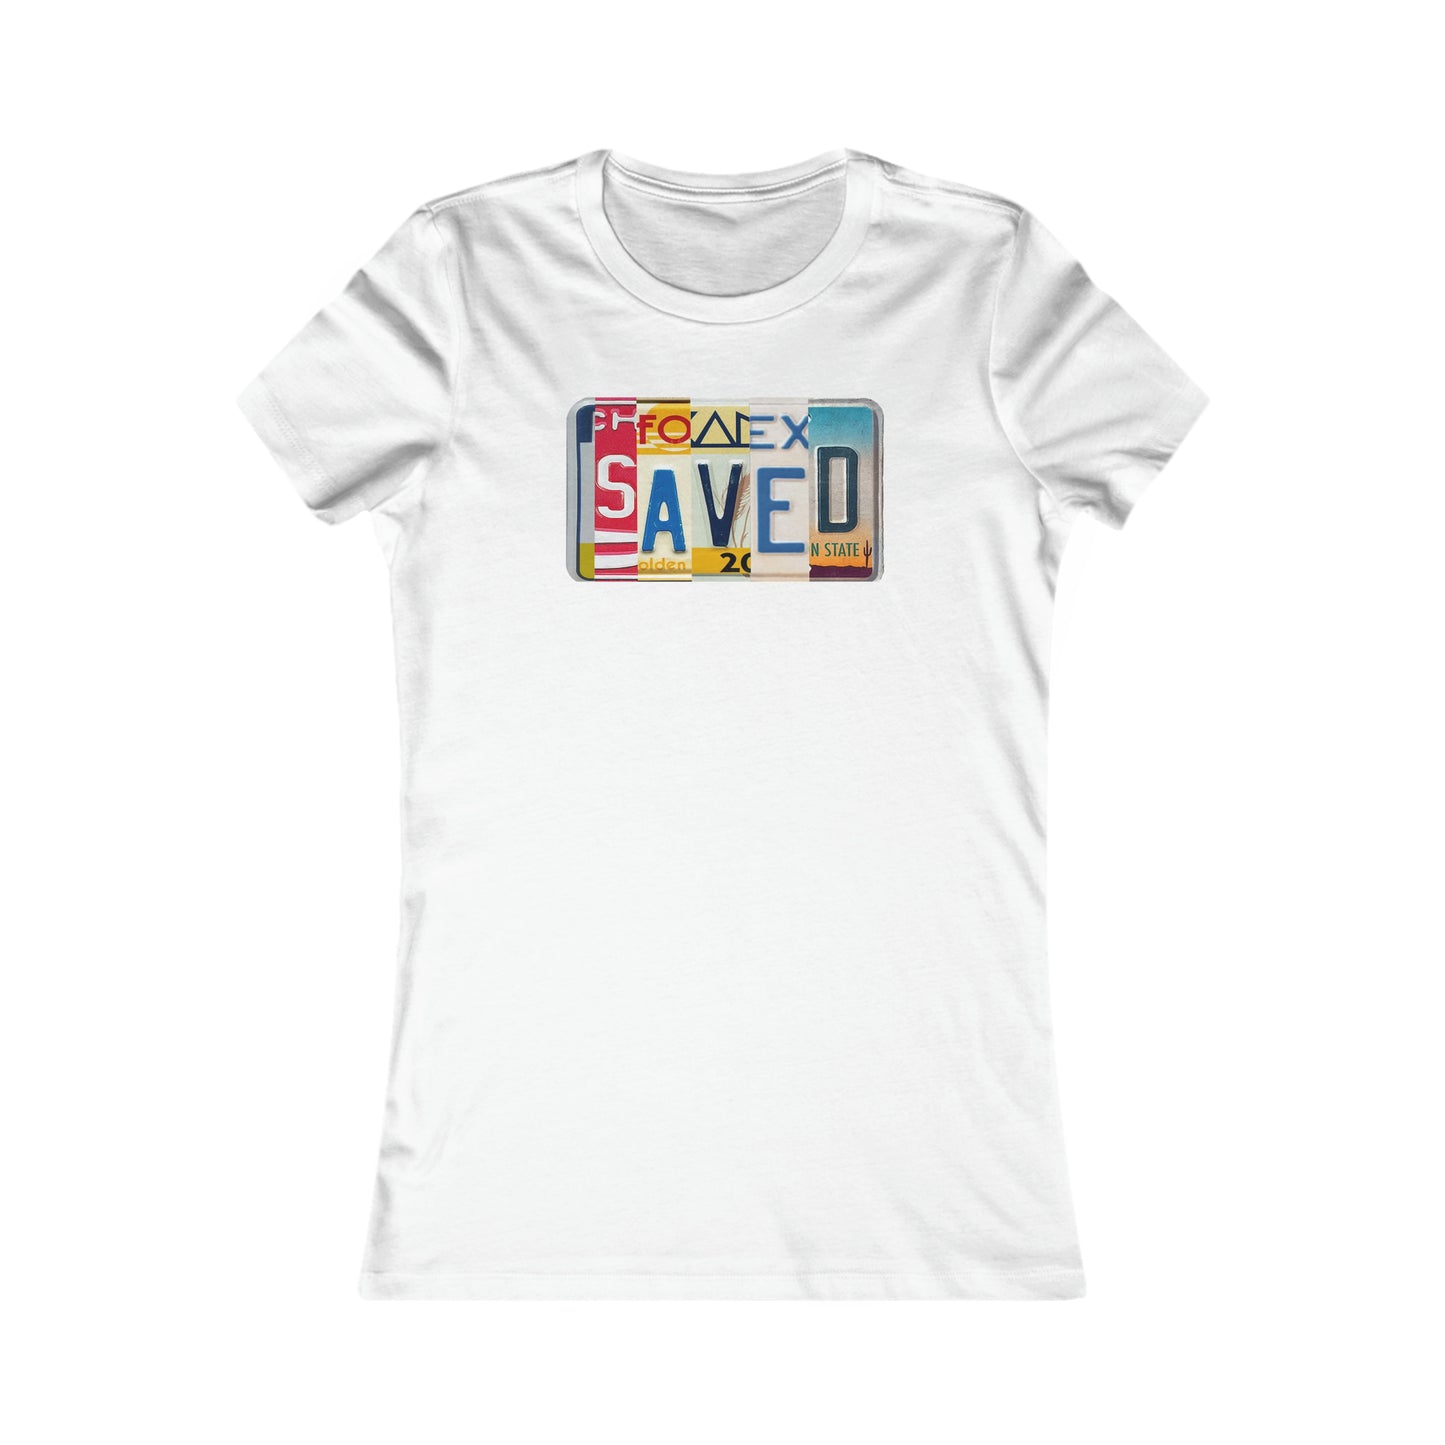 Inspirational 'Saved' Bella and Canvas Women's Favorite Tee - Comfortable and Stylish Shirt